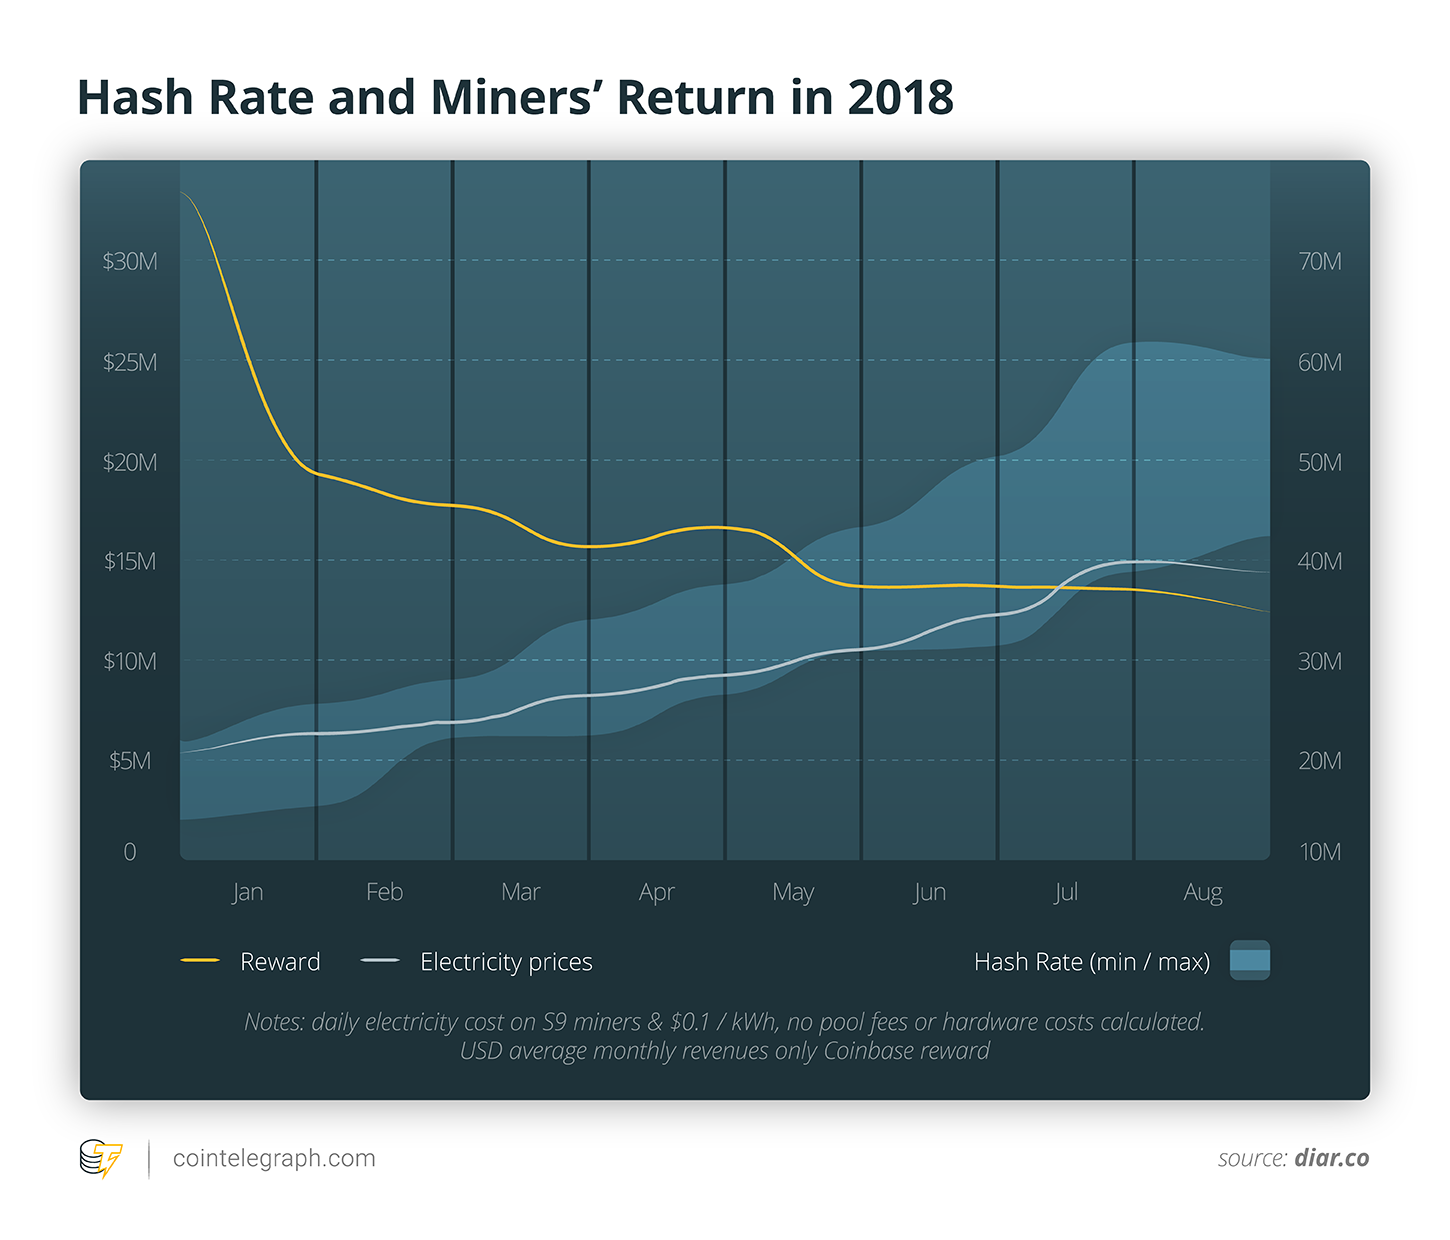 Hash Rate and Miners' Return in 2018